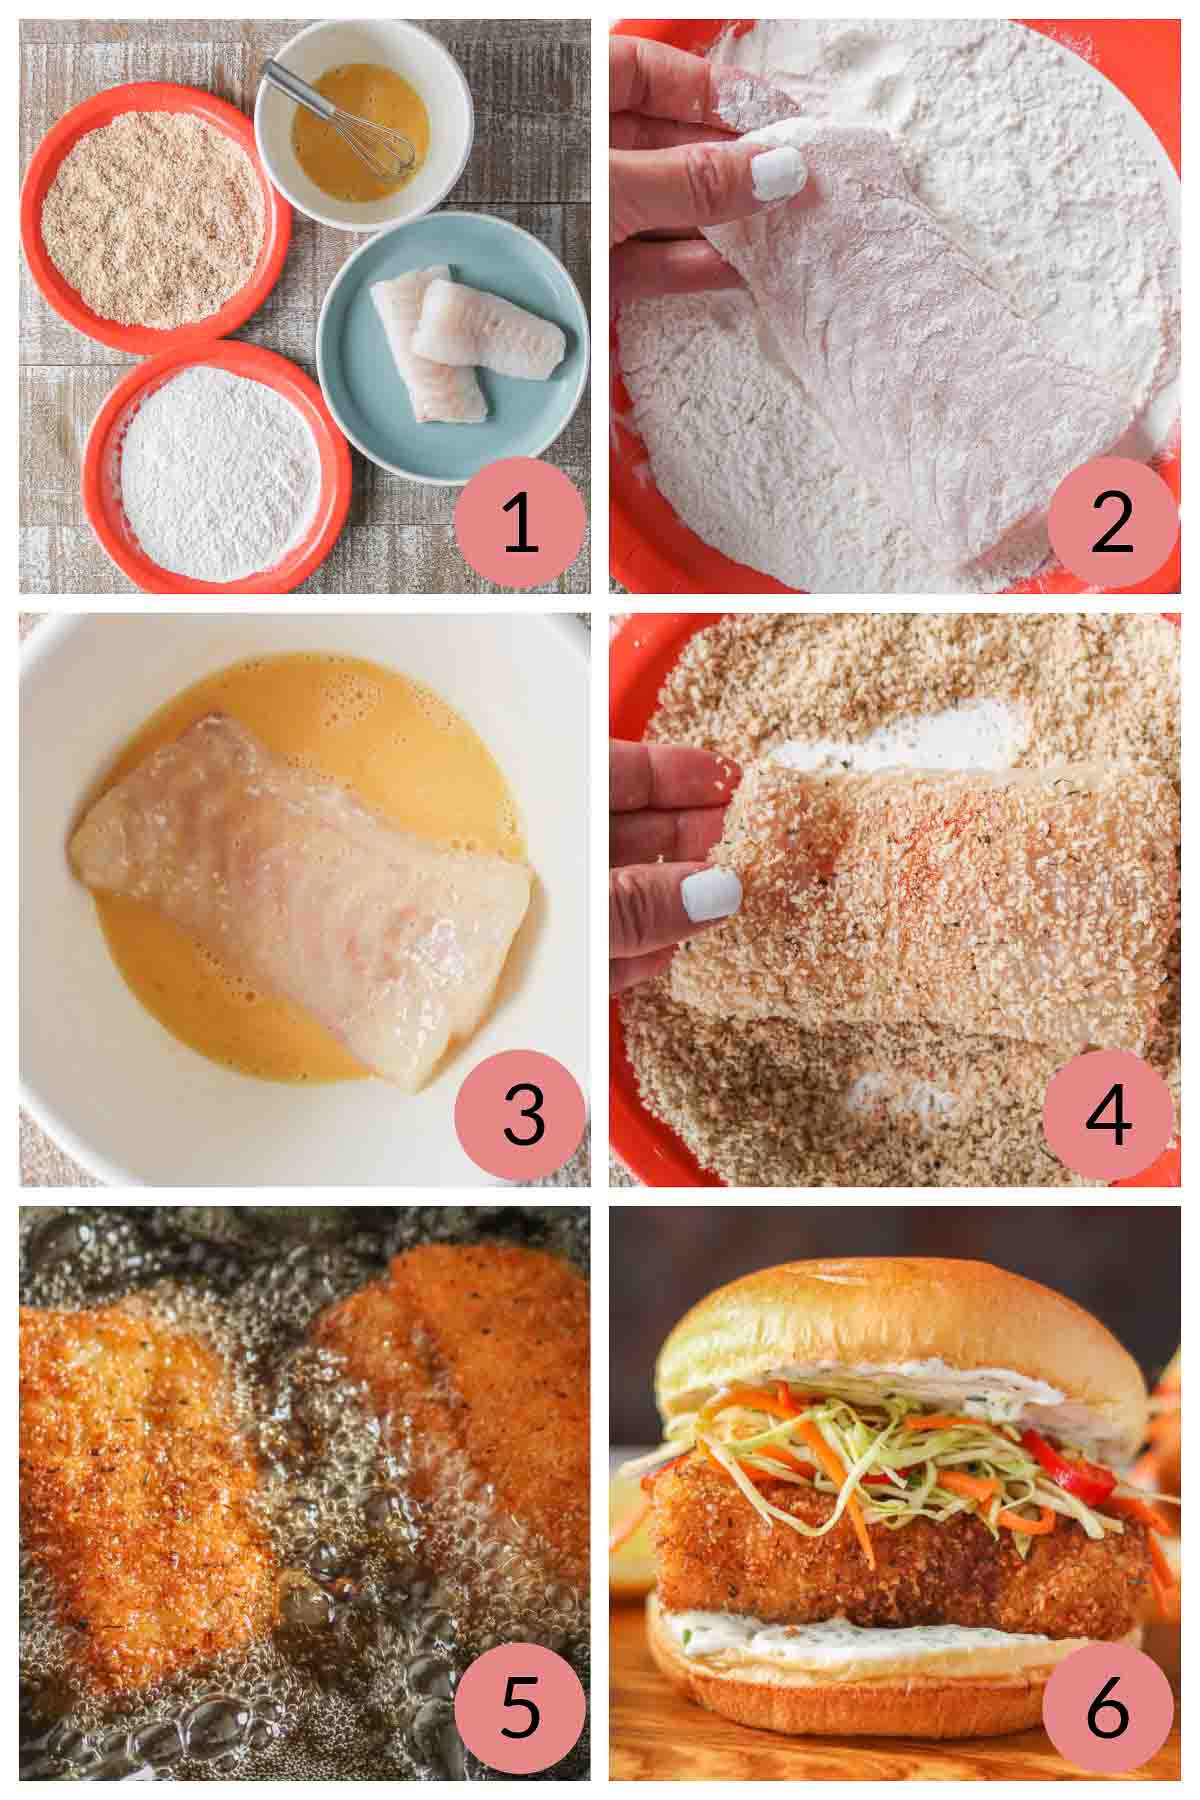 Collage of steps to make a crispy fish burger recipe.